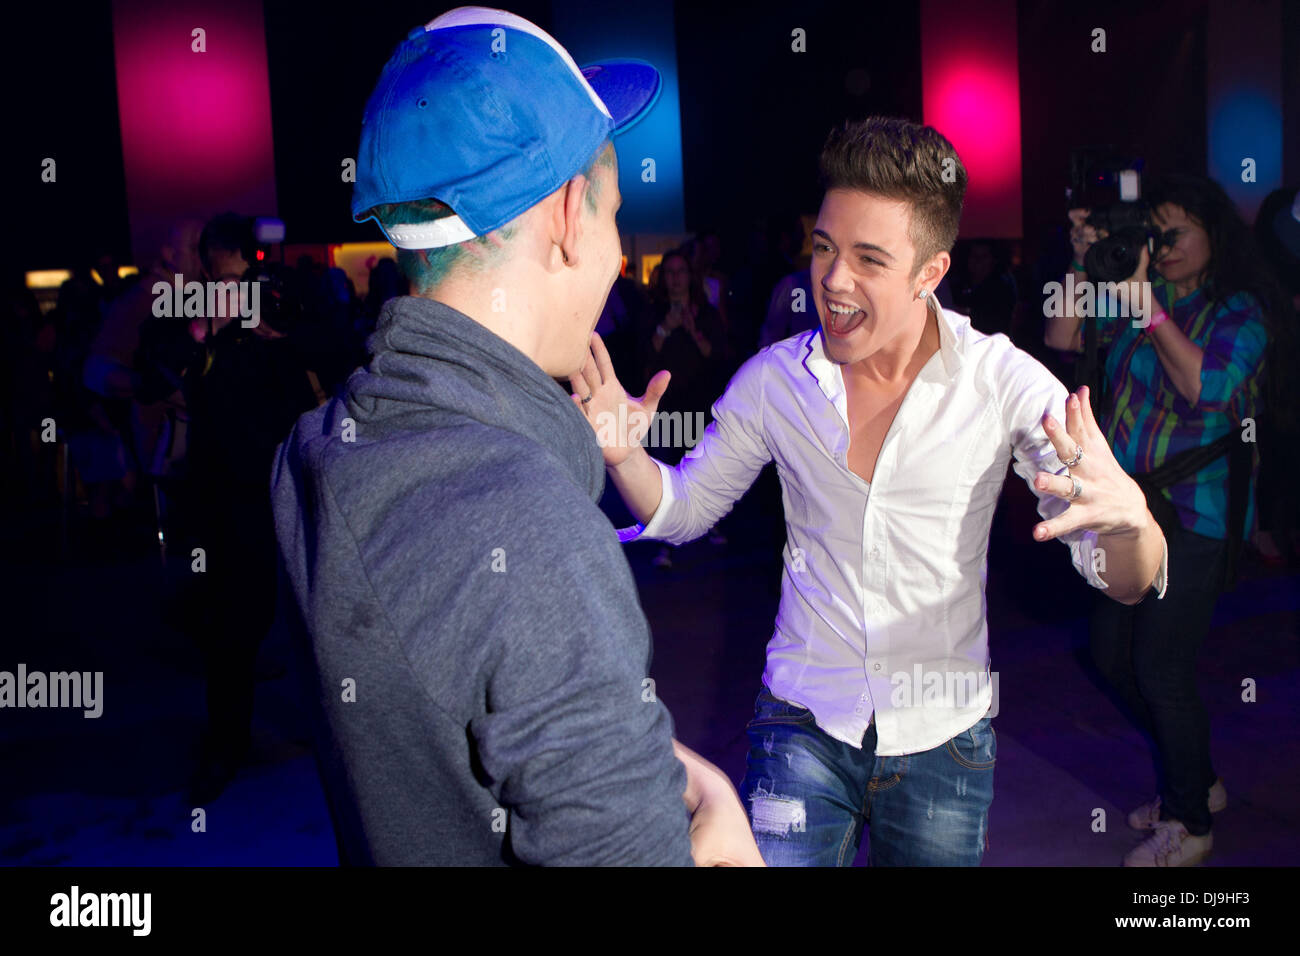 Daniele Negroni, Luca Haenni on German RTL TV show 'Deutschland sucht den Superstar' ('DSDS') at Coloneum studios - After Show Party. Cologne, Germany - 28.04.2012 Stock Photo